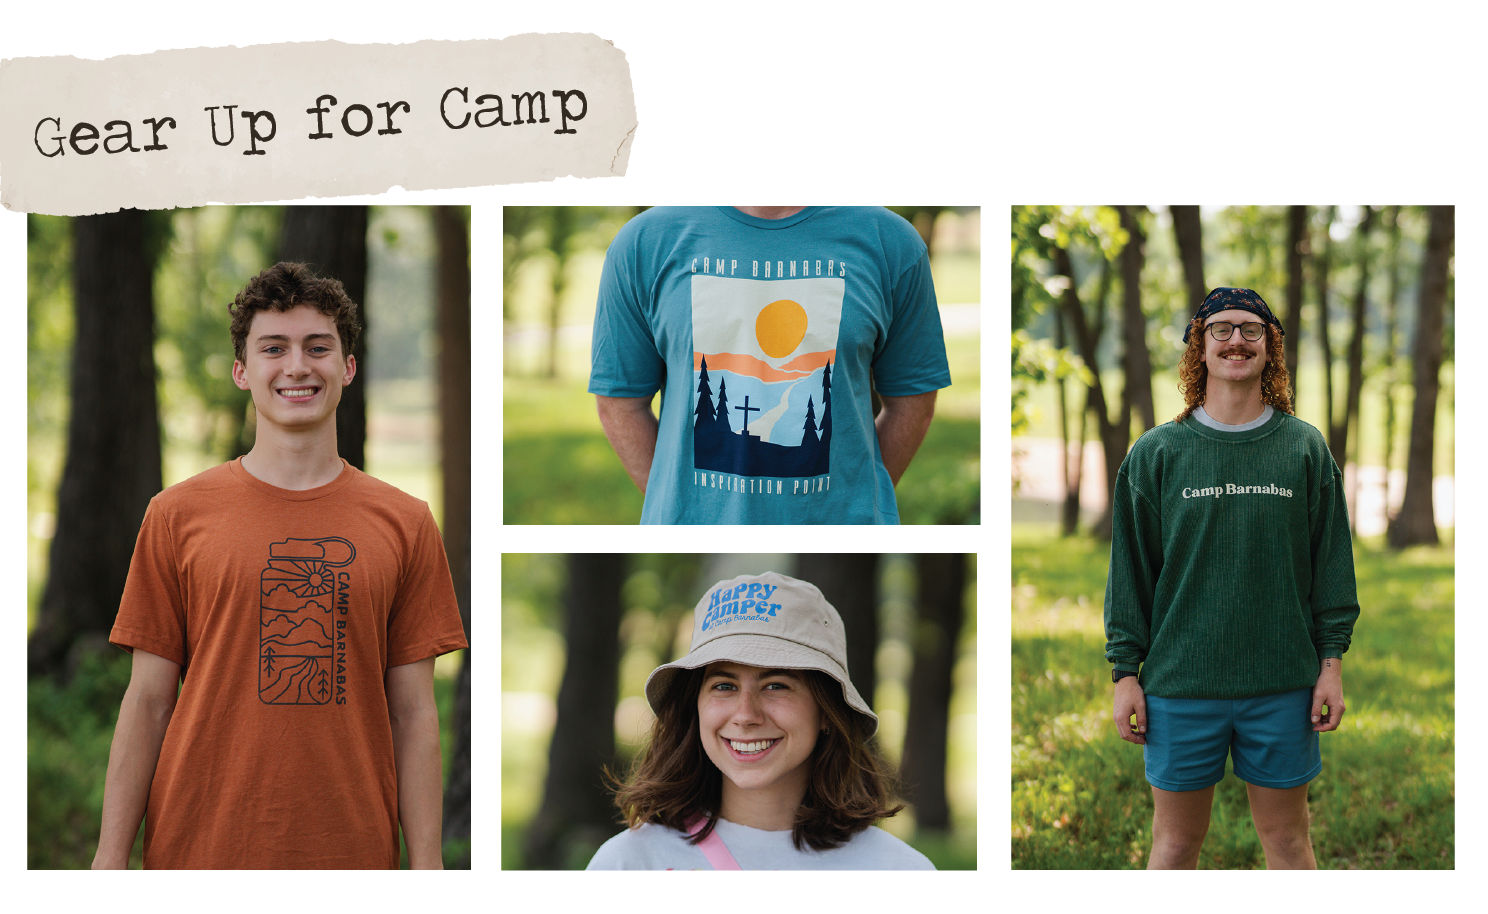 Gear Up for Camp